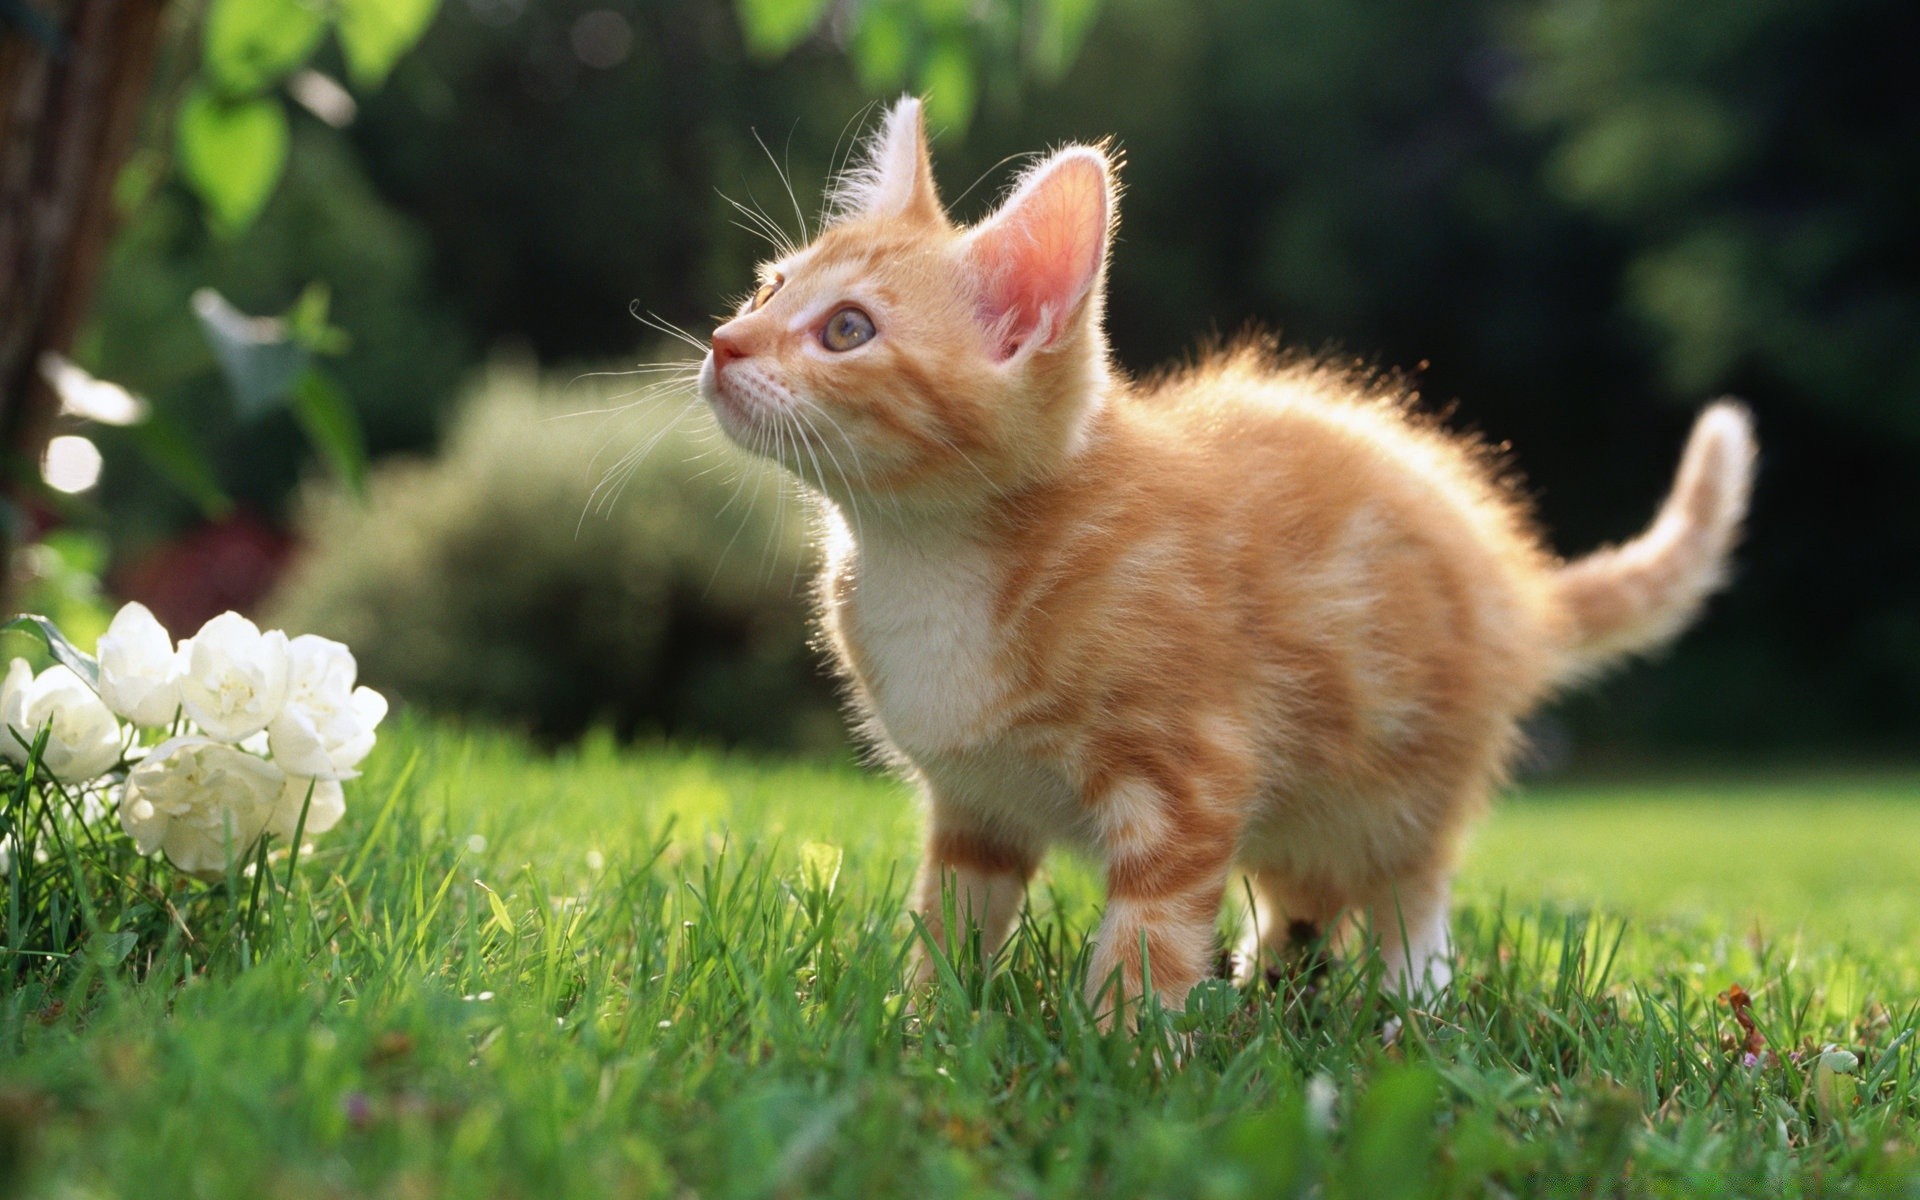 cats animal mammal cute grass nature fur young pet little baby portrait domestic